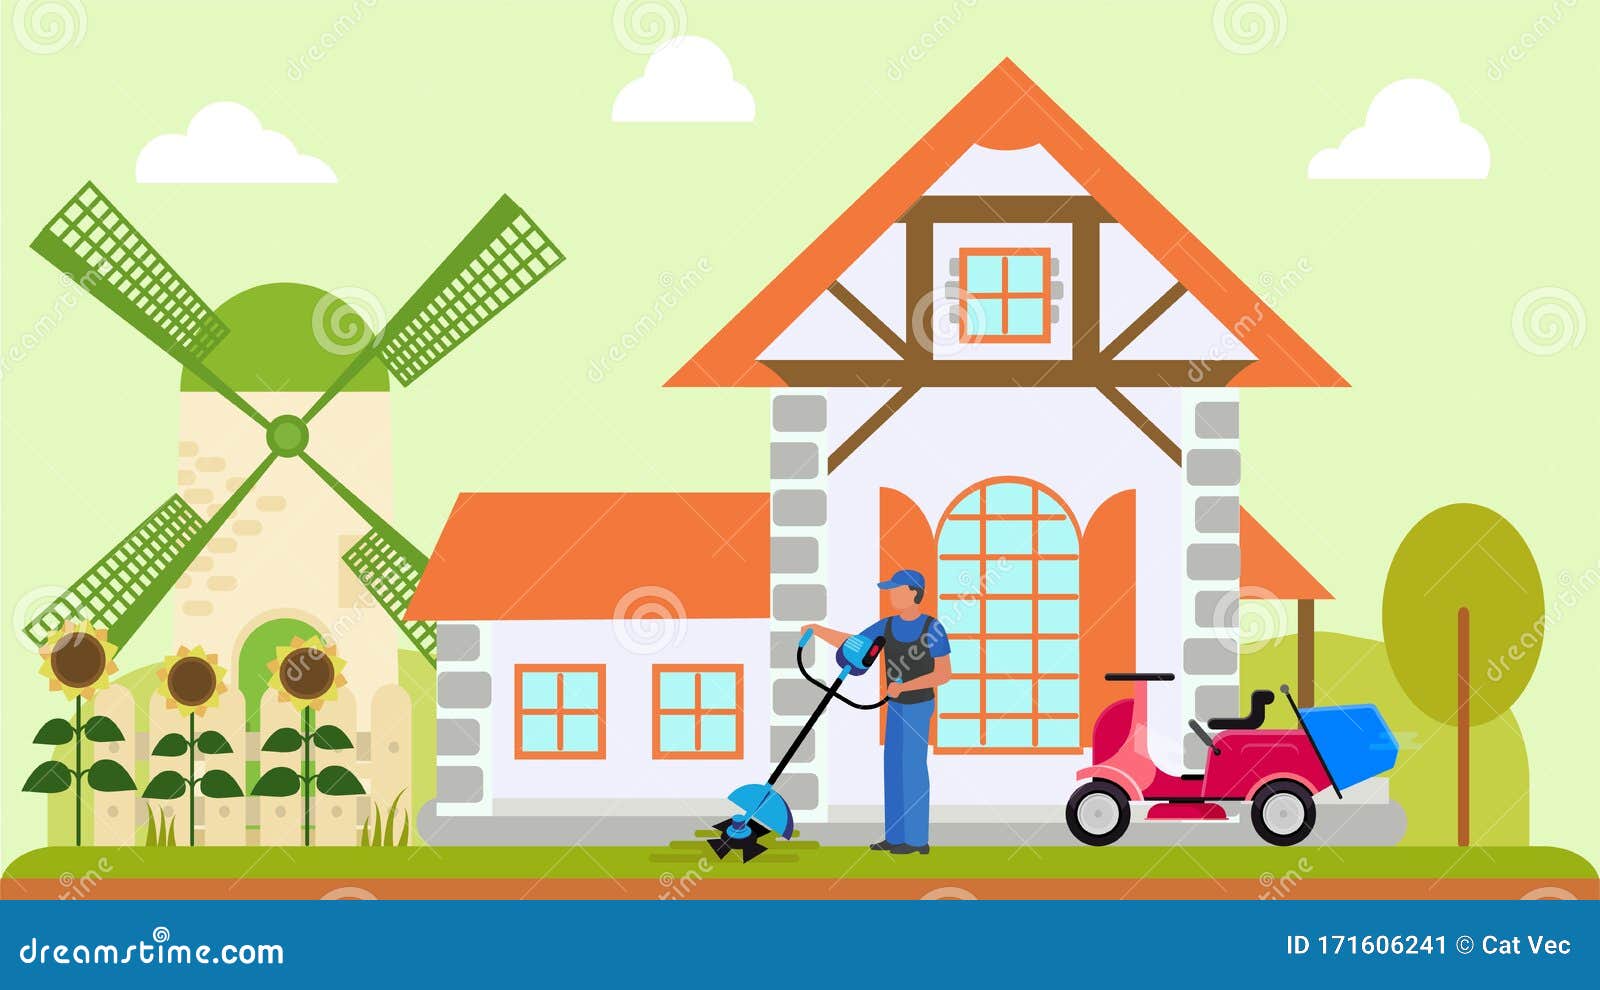 Man worker or owner mows lawn near country house vector illustration. Motorcycle and electric two lawn mowers garden. Man worker gardener or owner mows grass lawn near country house vector illustration. Motorcycle and electric two lawn mowers equipment household machine. Mill, blooming sunflowers.